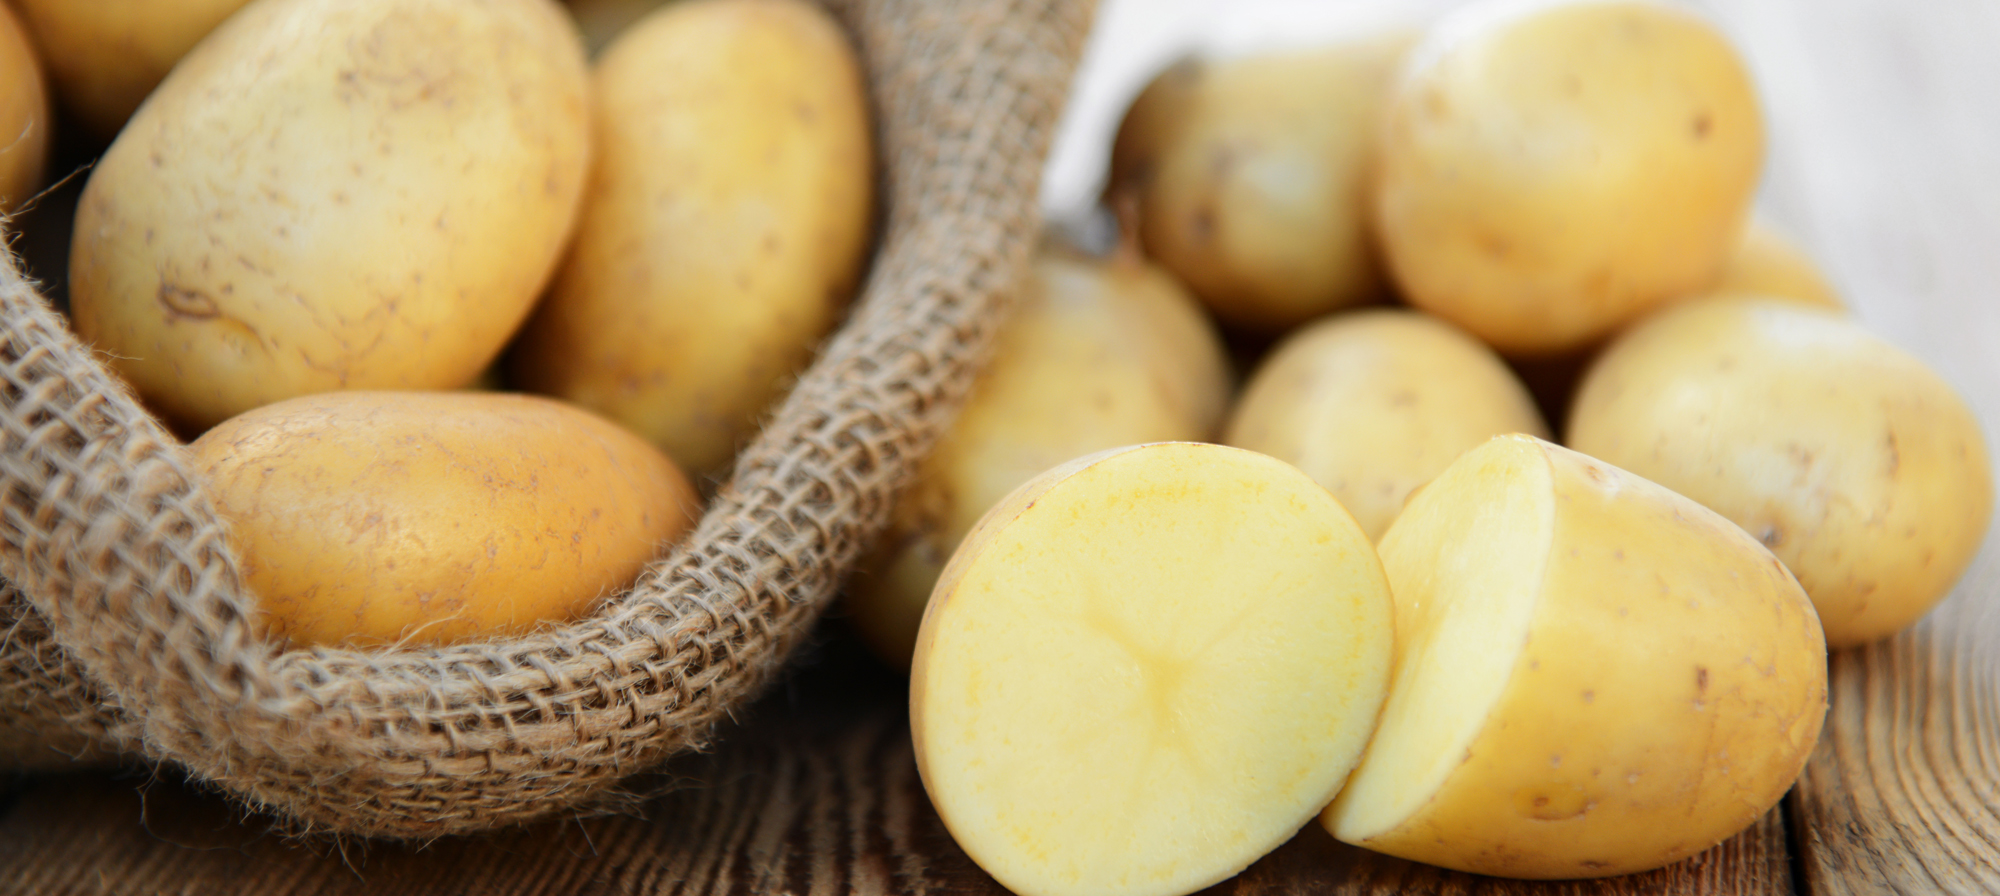 Why It’s Perfectly OK to Keep Potatoes on Your Weight Loss Menu